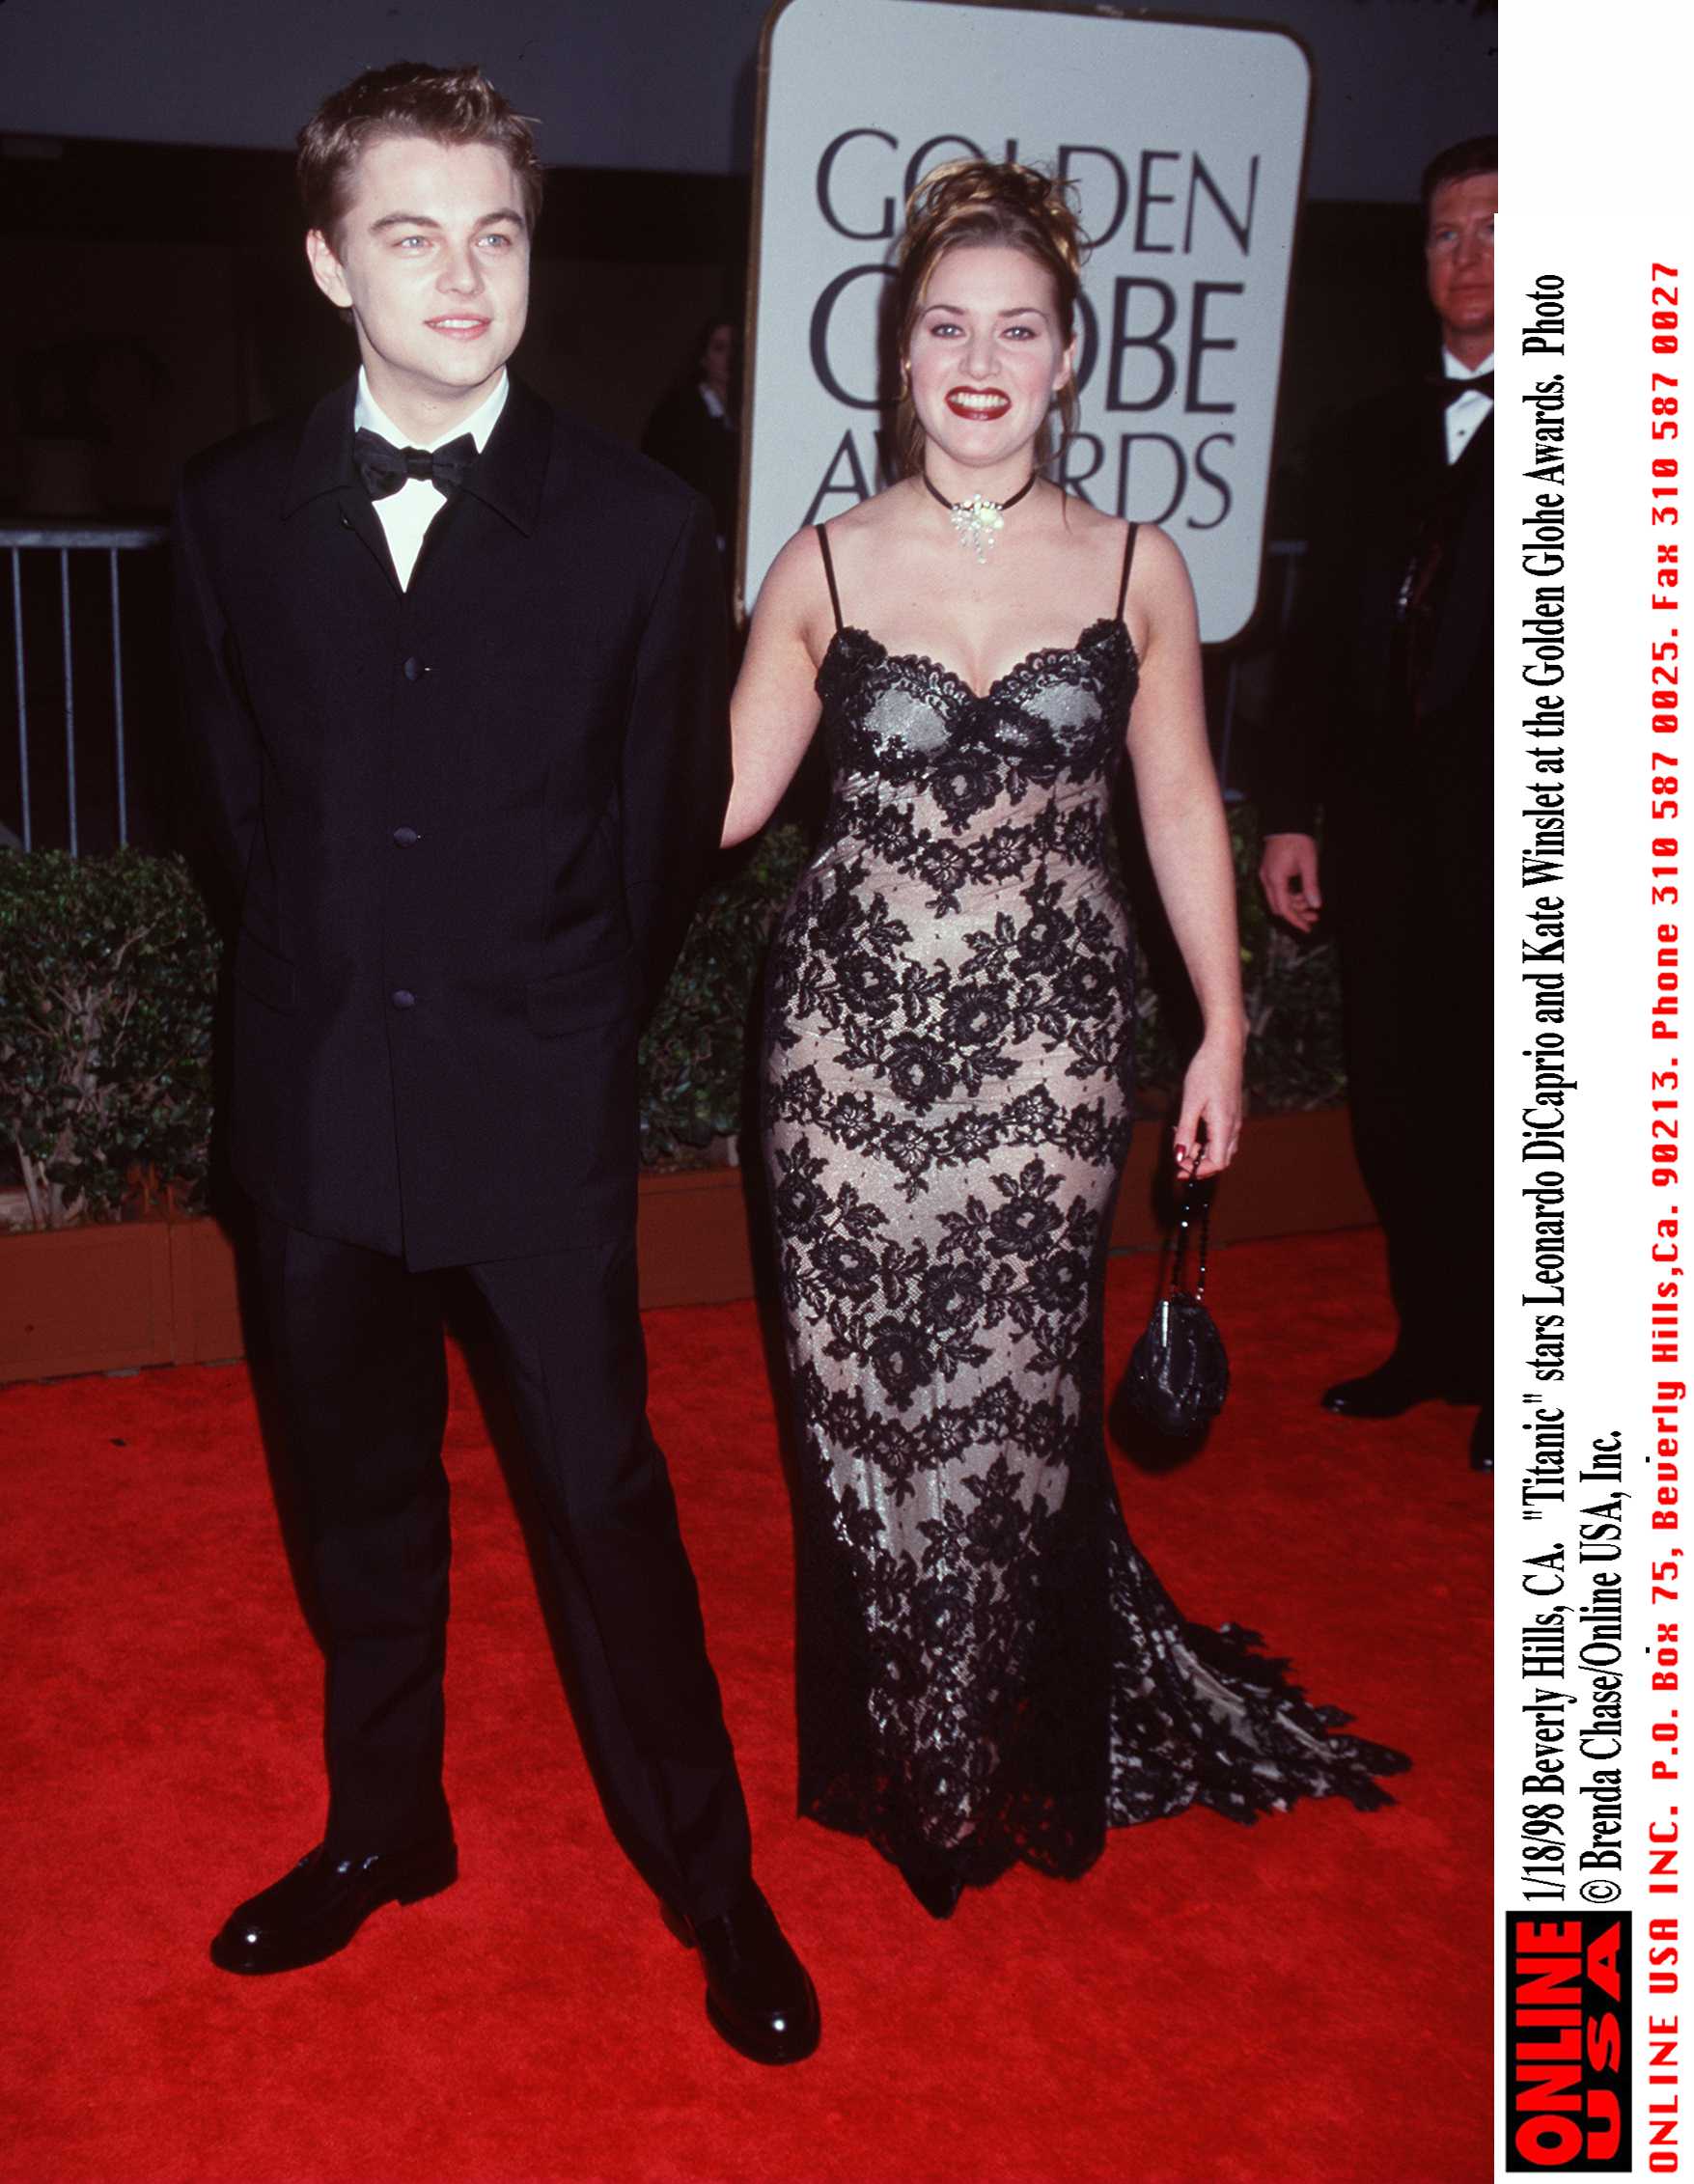 Actor Leonardo DiCaprio and Kate Winslet attend the Golden Globe Awards at the Beverly Hilton on January 18, 1998 in Beverly Hills, California┃Source: Getty Images